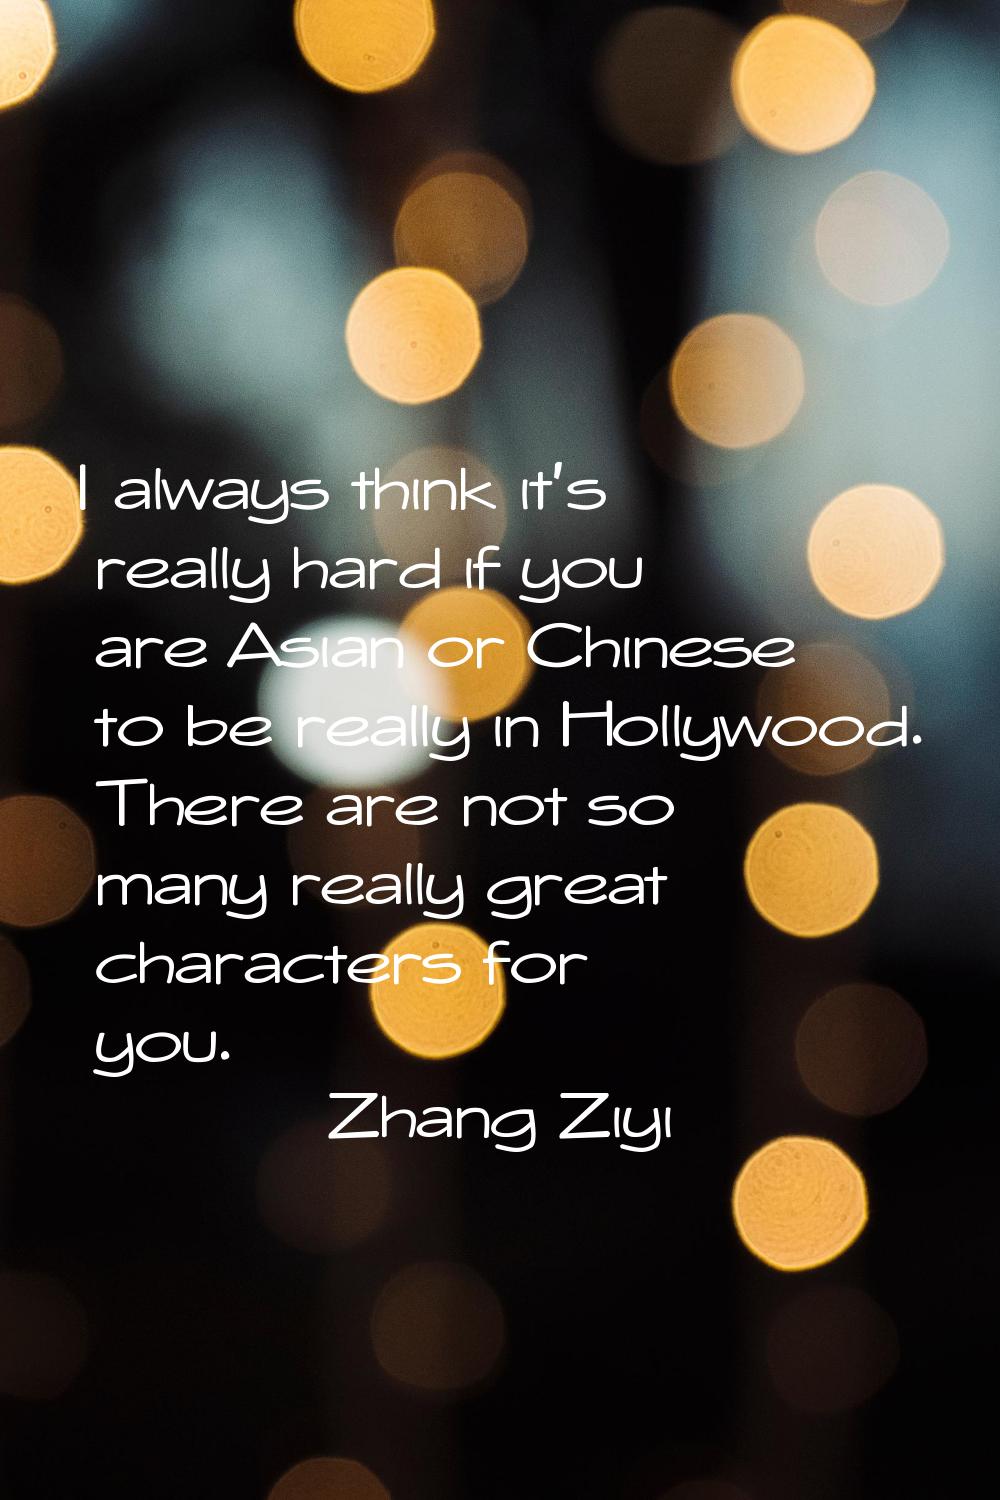 I always think it's really hard if you are Asian or Chinese to be really in Hollywood. There are no